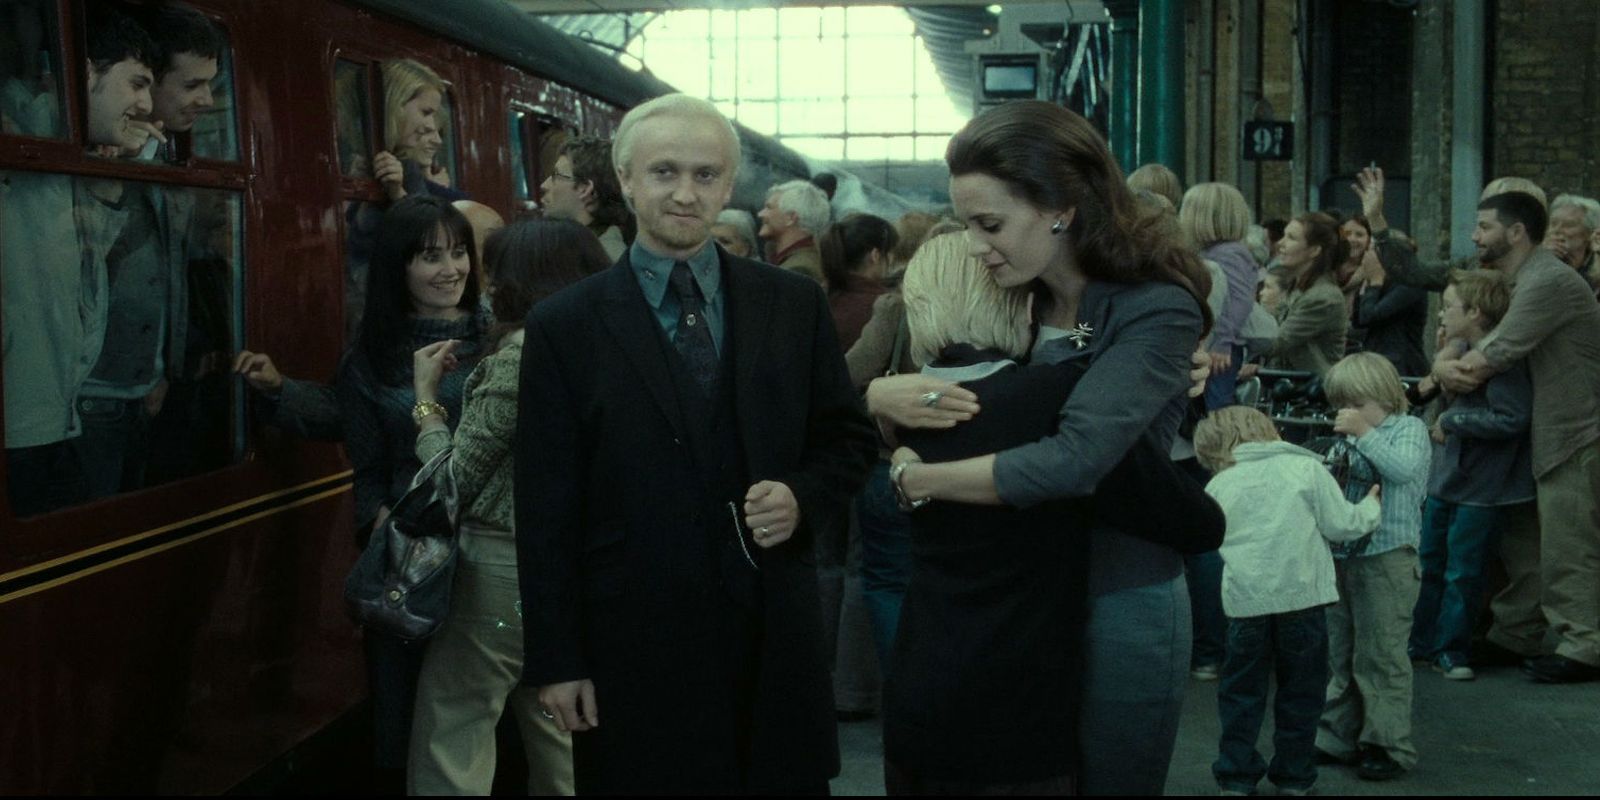 Malfoy with his family at the end of Harry Potter and the Deathly Hallows Part 2.